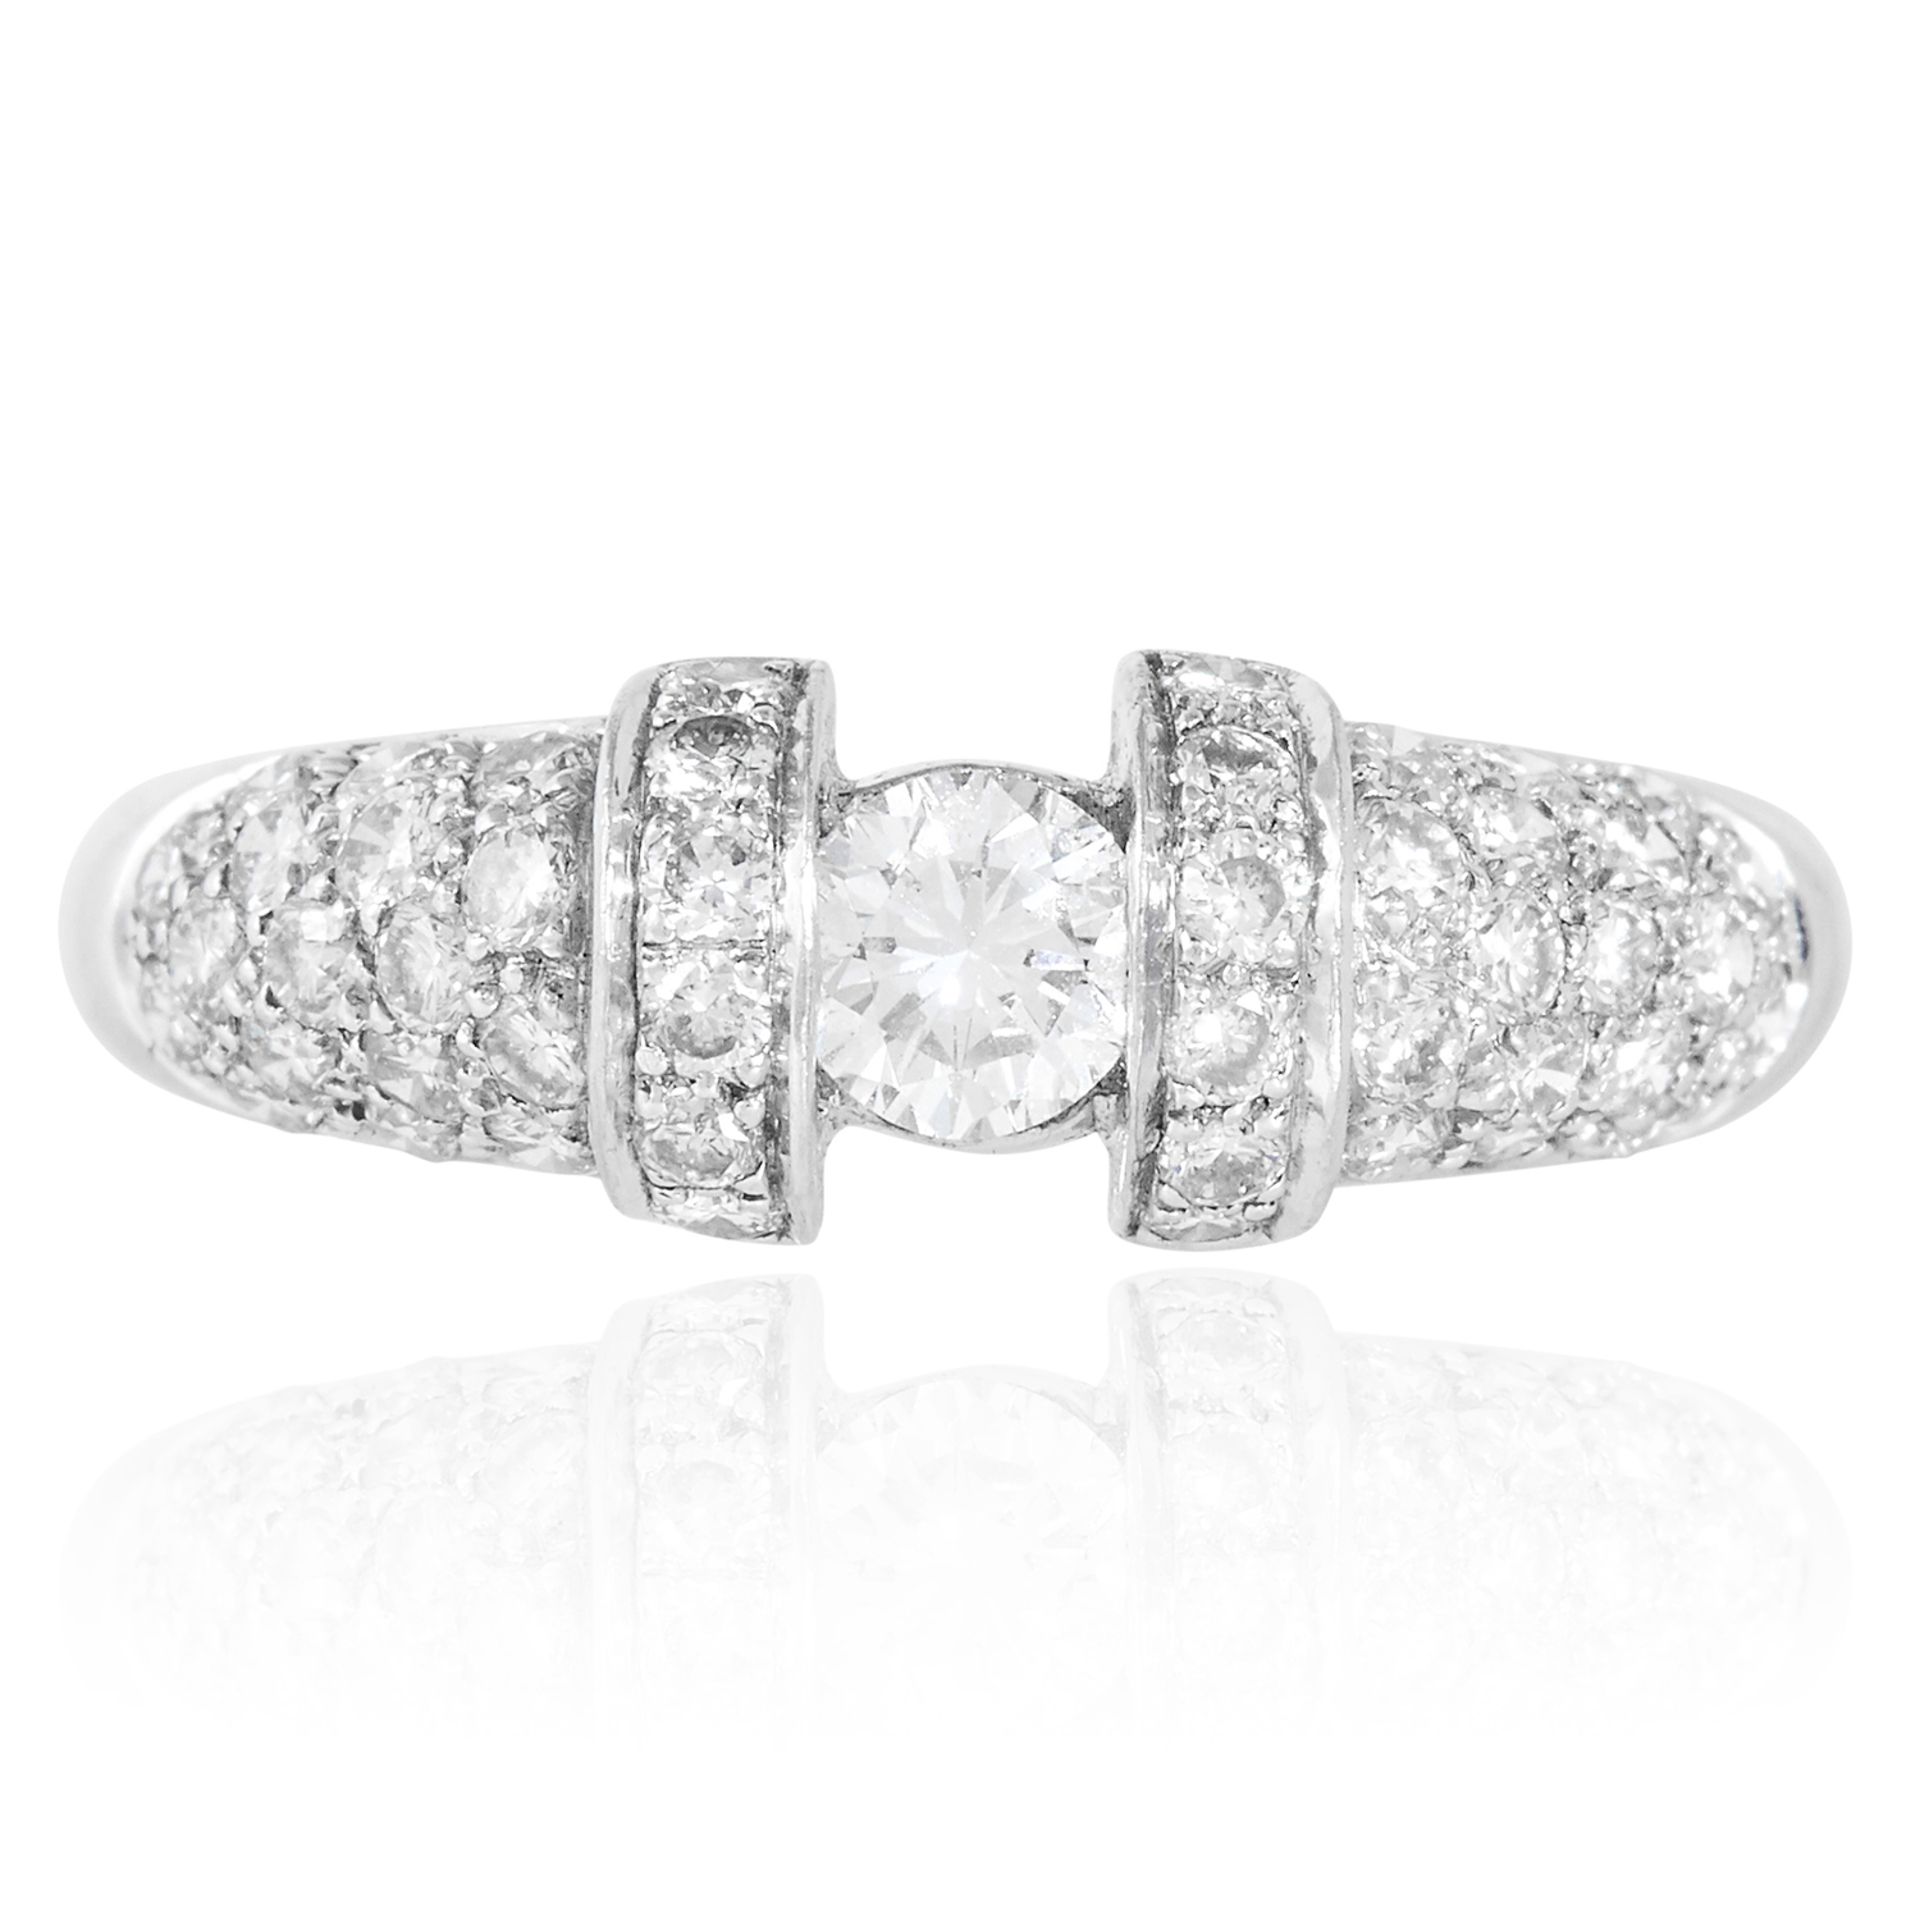 A DIAMOND DRESS RING in platinum, set with a round cut diamond of approximately 0.25 carats and